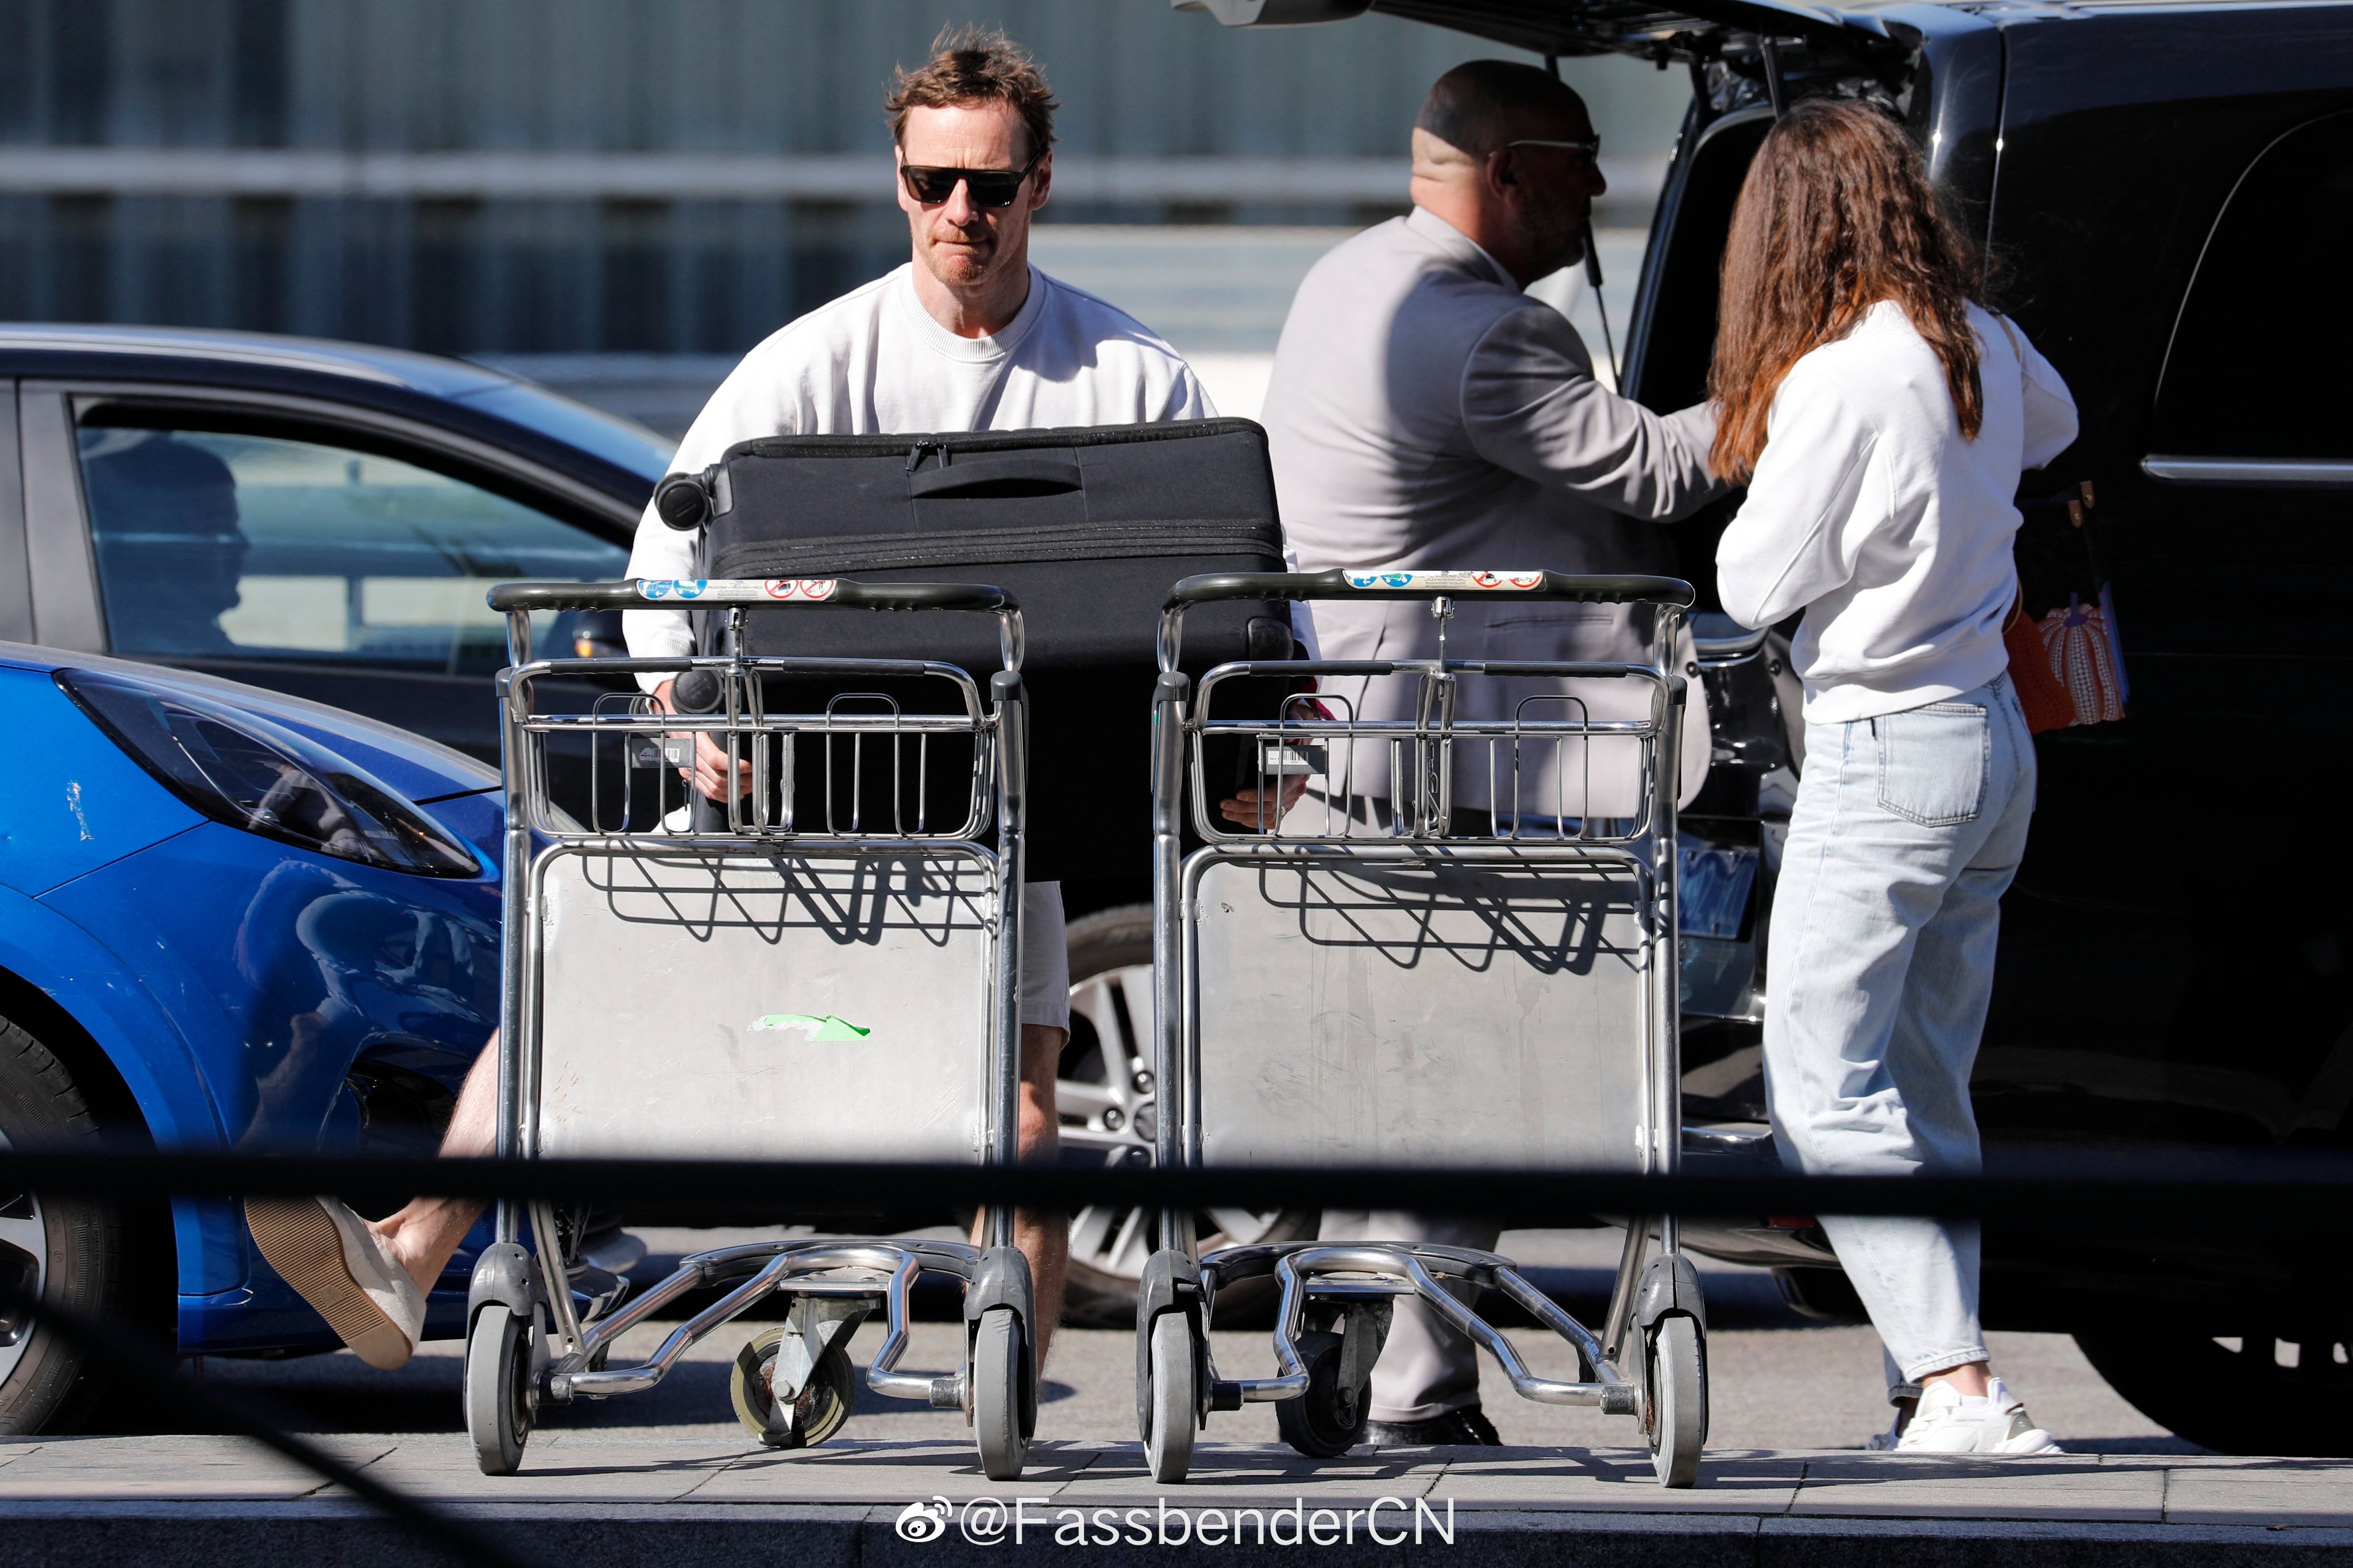 BeatlesFass on X: 🆕 Michael Fassbender and wife Alicia Vikander